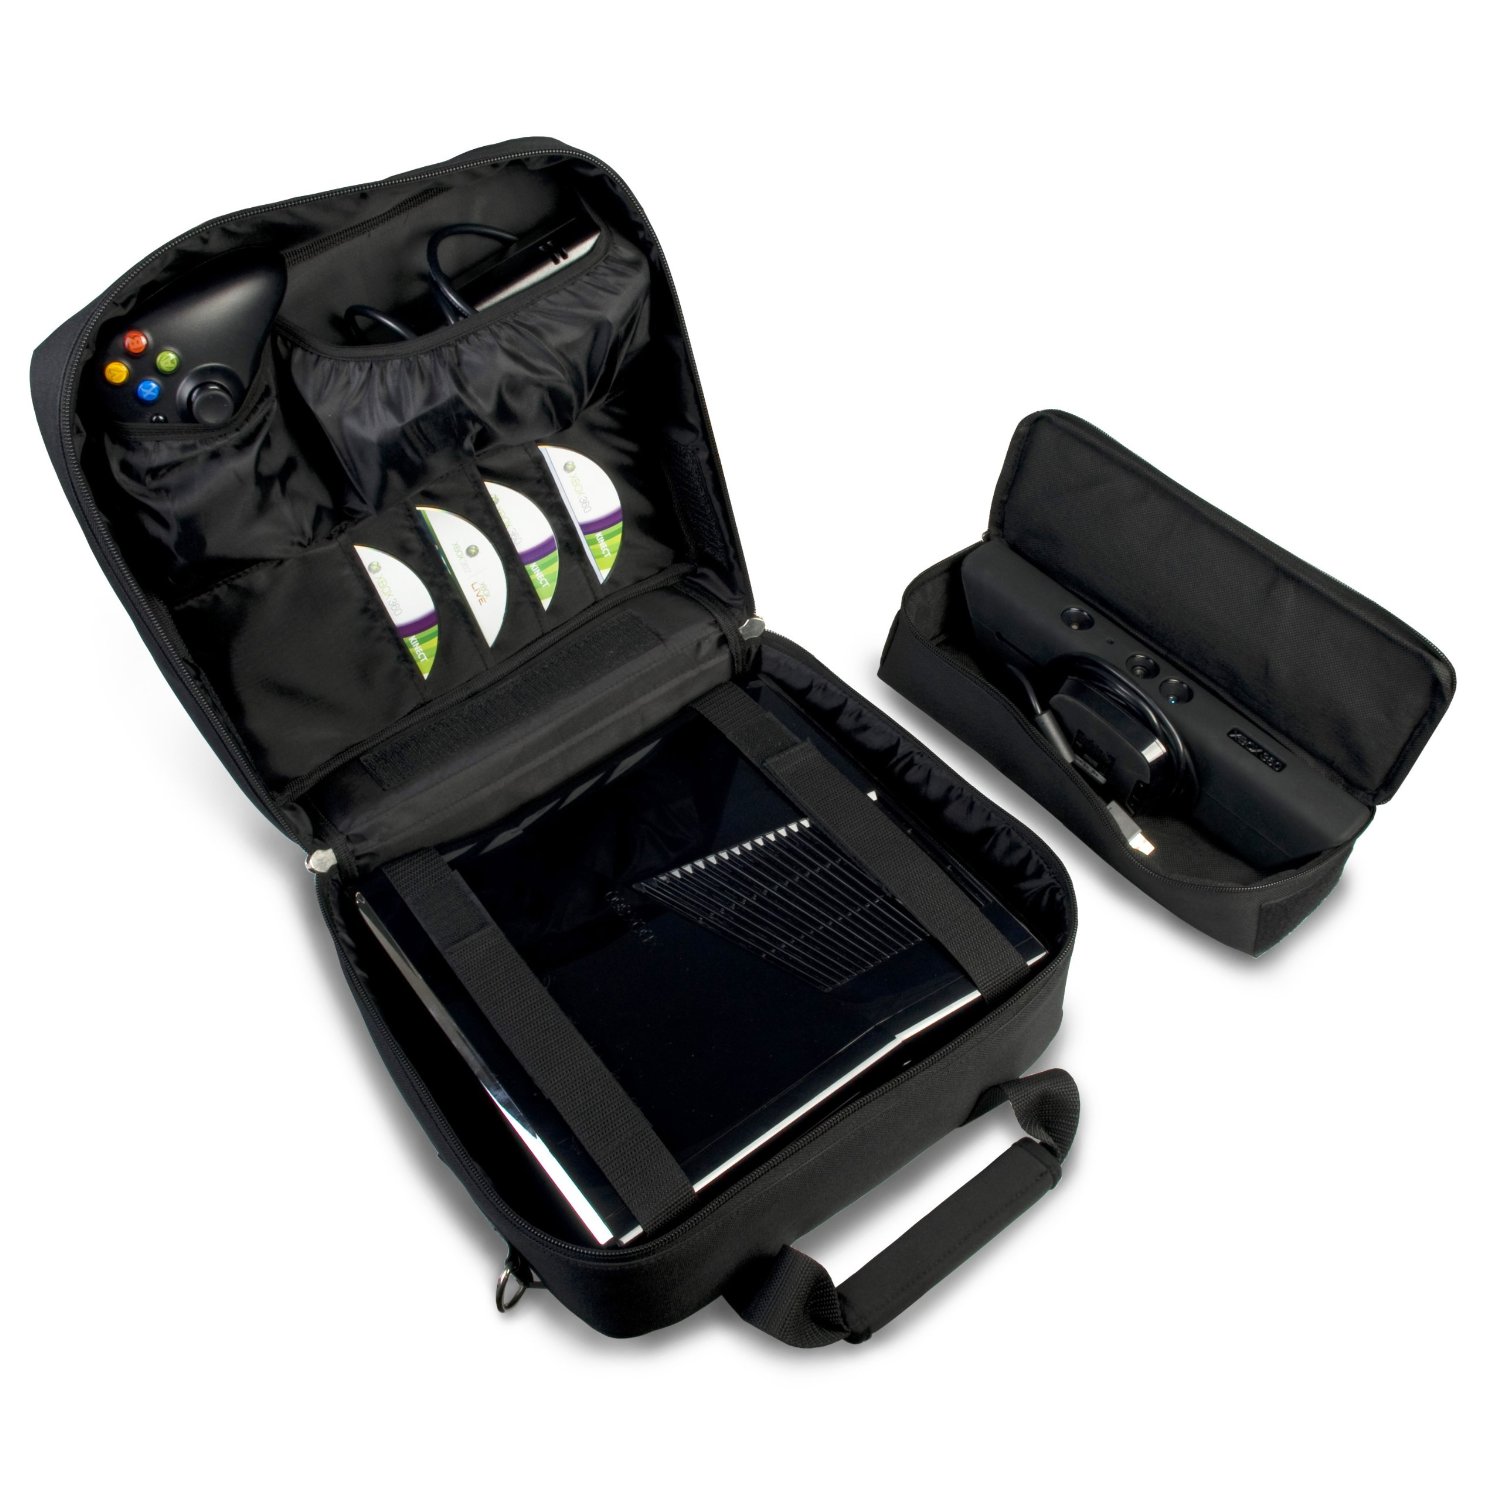 Xbox 360 Travel Case With Space For Kinect, Controllers